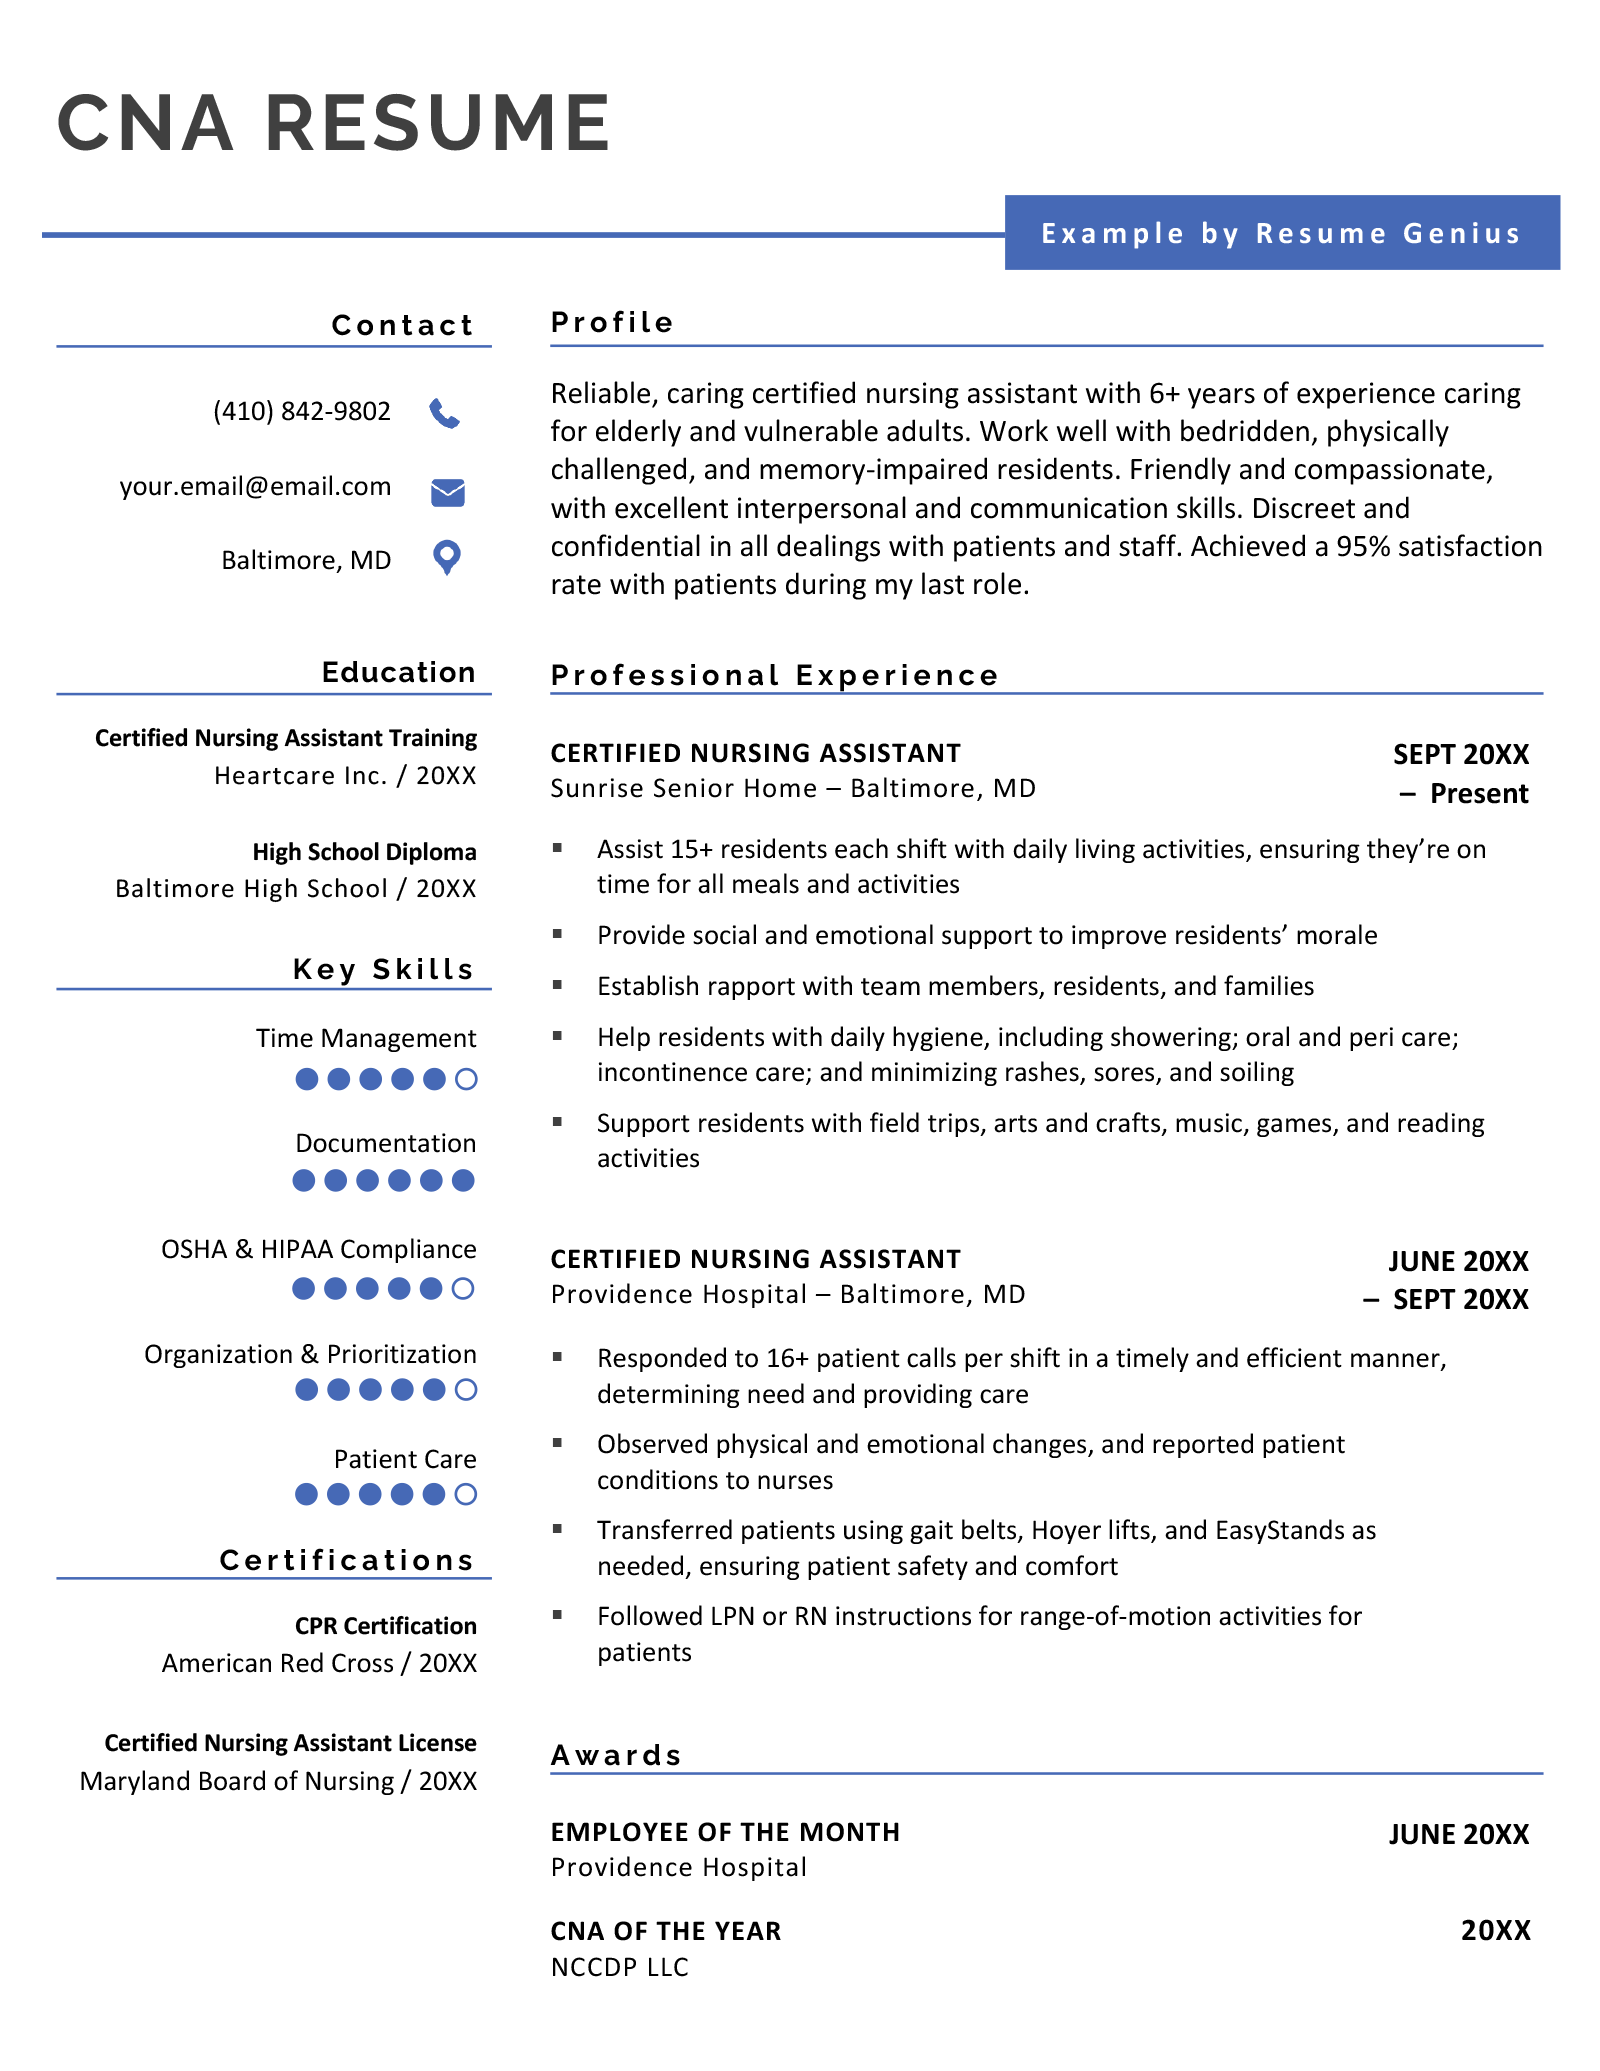 An example of a CNA resume for certified nursing assistants of all experience levels